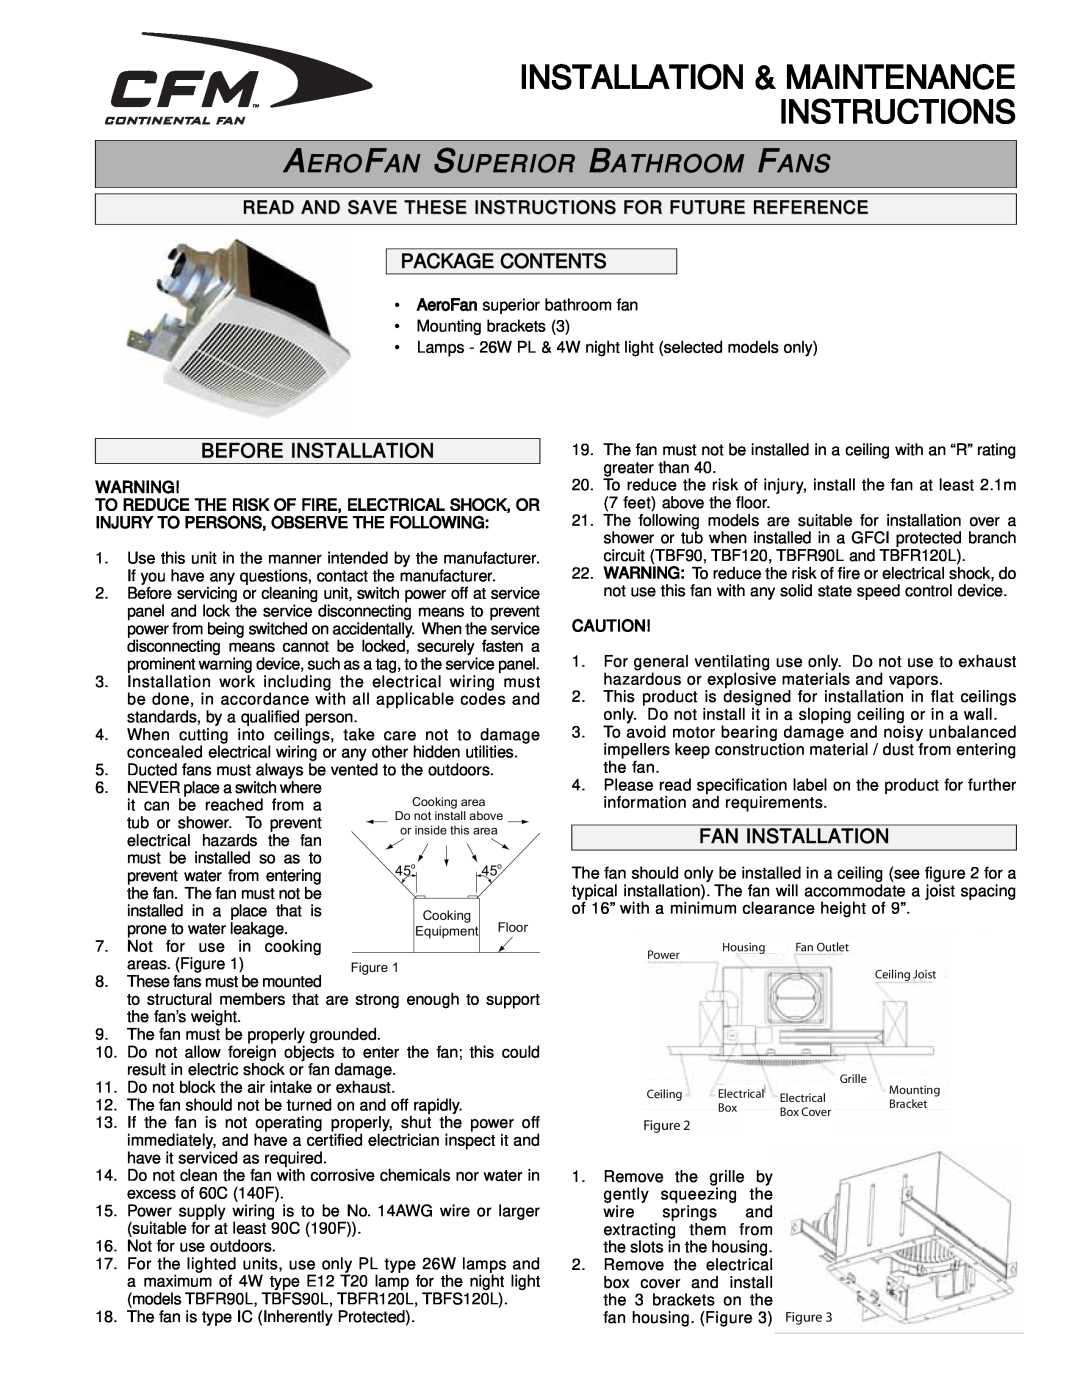 CFM TBFR90L, TBF90 manual Package Contents, Before Installation, Fan Installation, Installation & Maintenance Instructions 